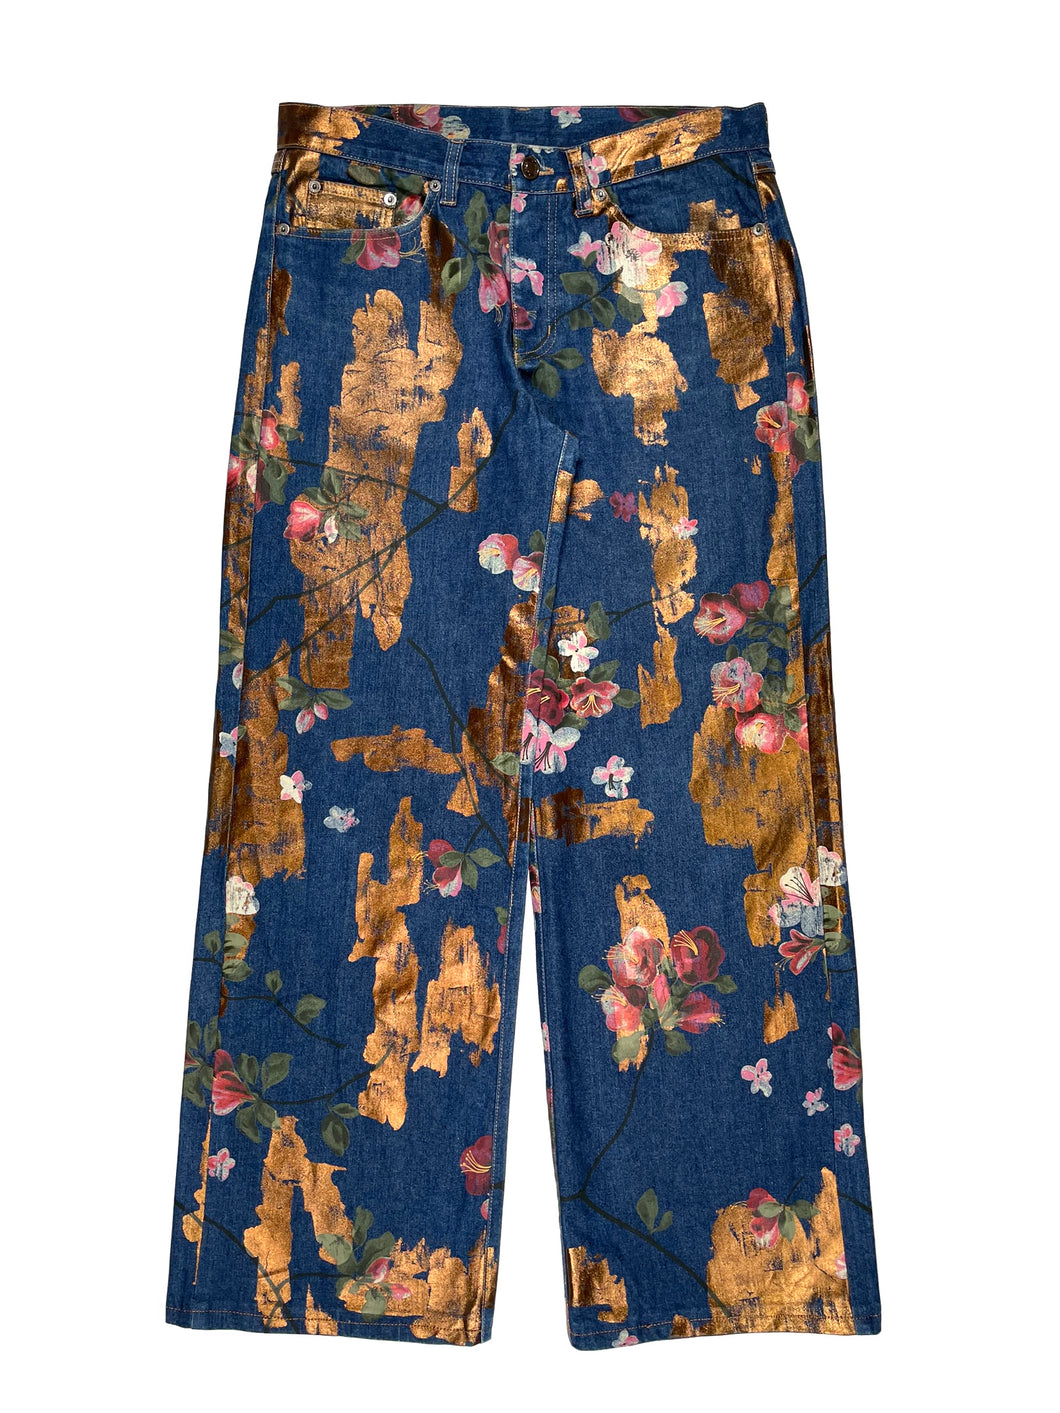 SS2001 Gucci by Tom Ford floral jeans